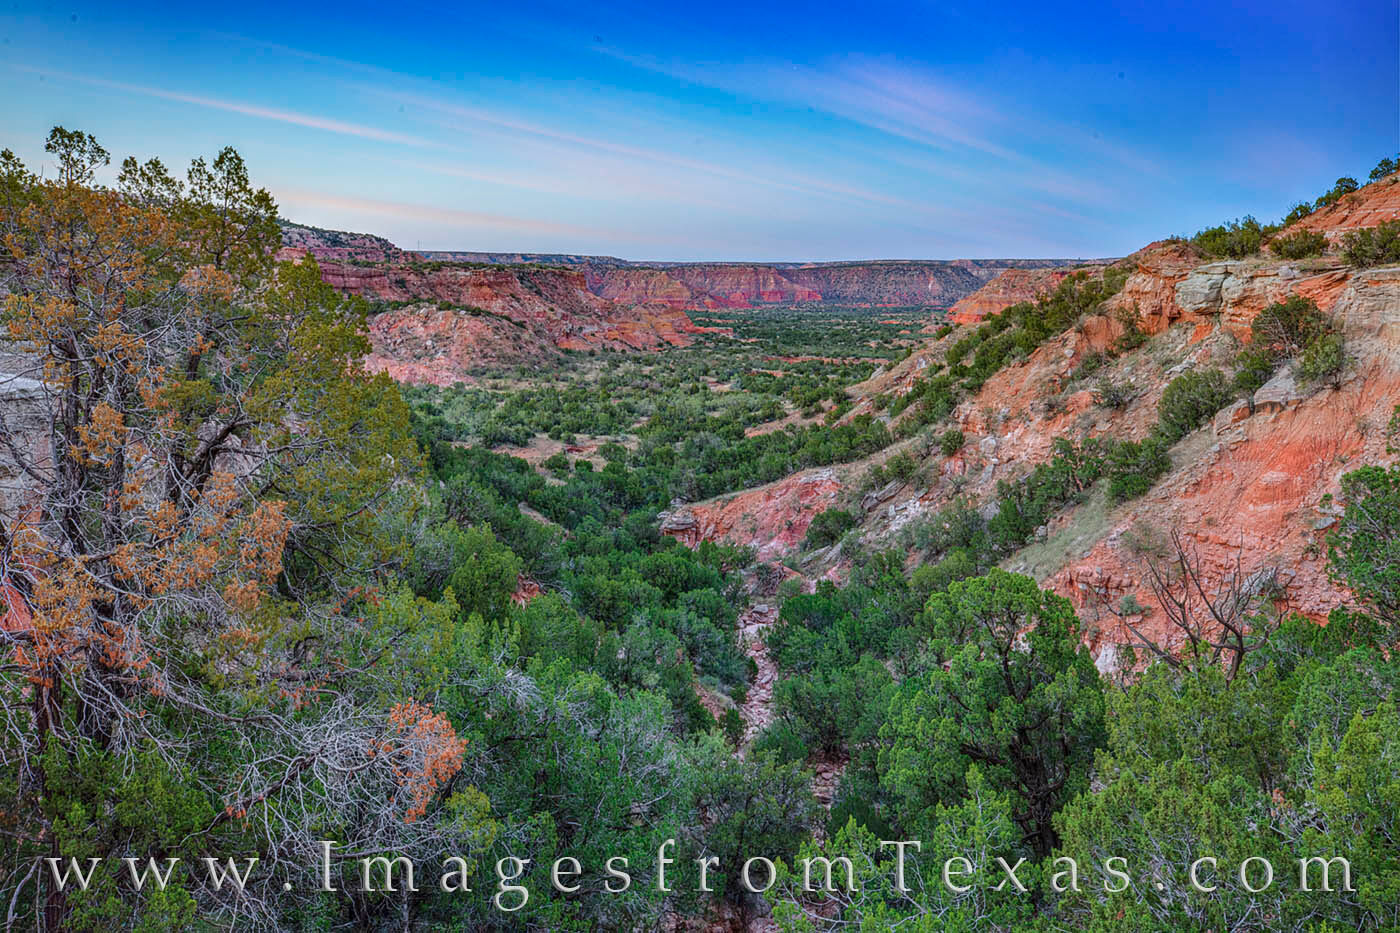 With light fading fast, this long exposure on a calm evening captures the beauty and depth of Palo Duro Canyon. Layers of time...